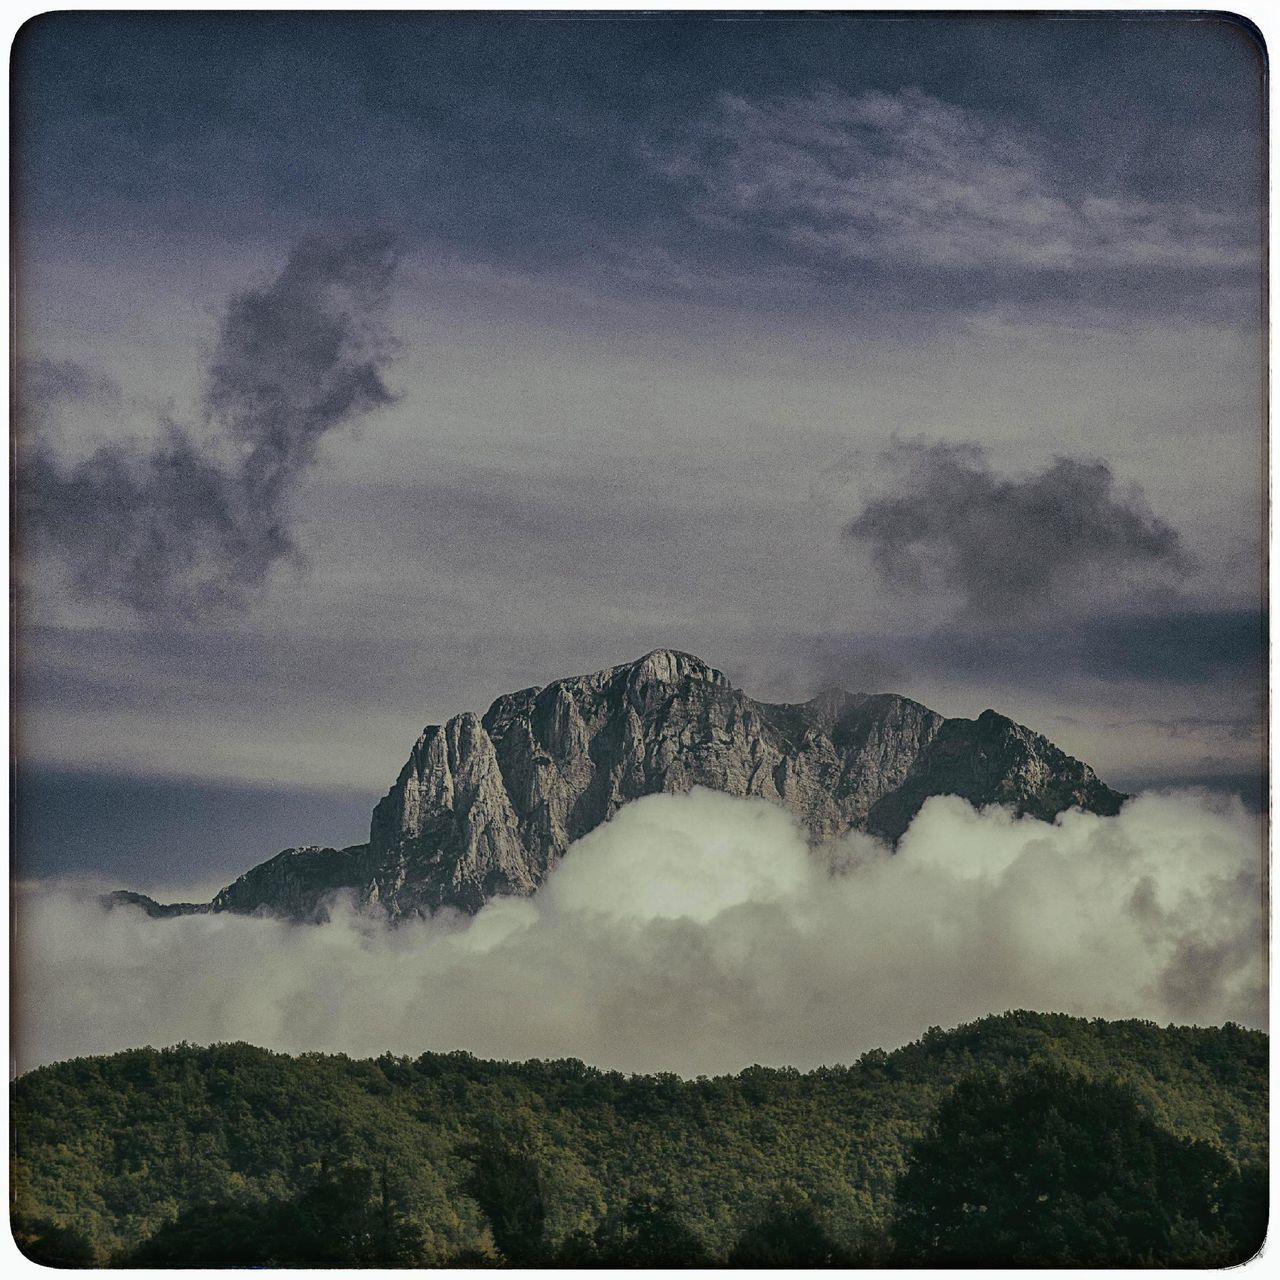 SCENIC VIEW OF CLOUDS OVER MOUNTAIN